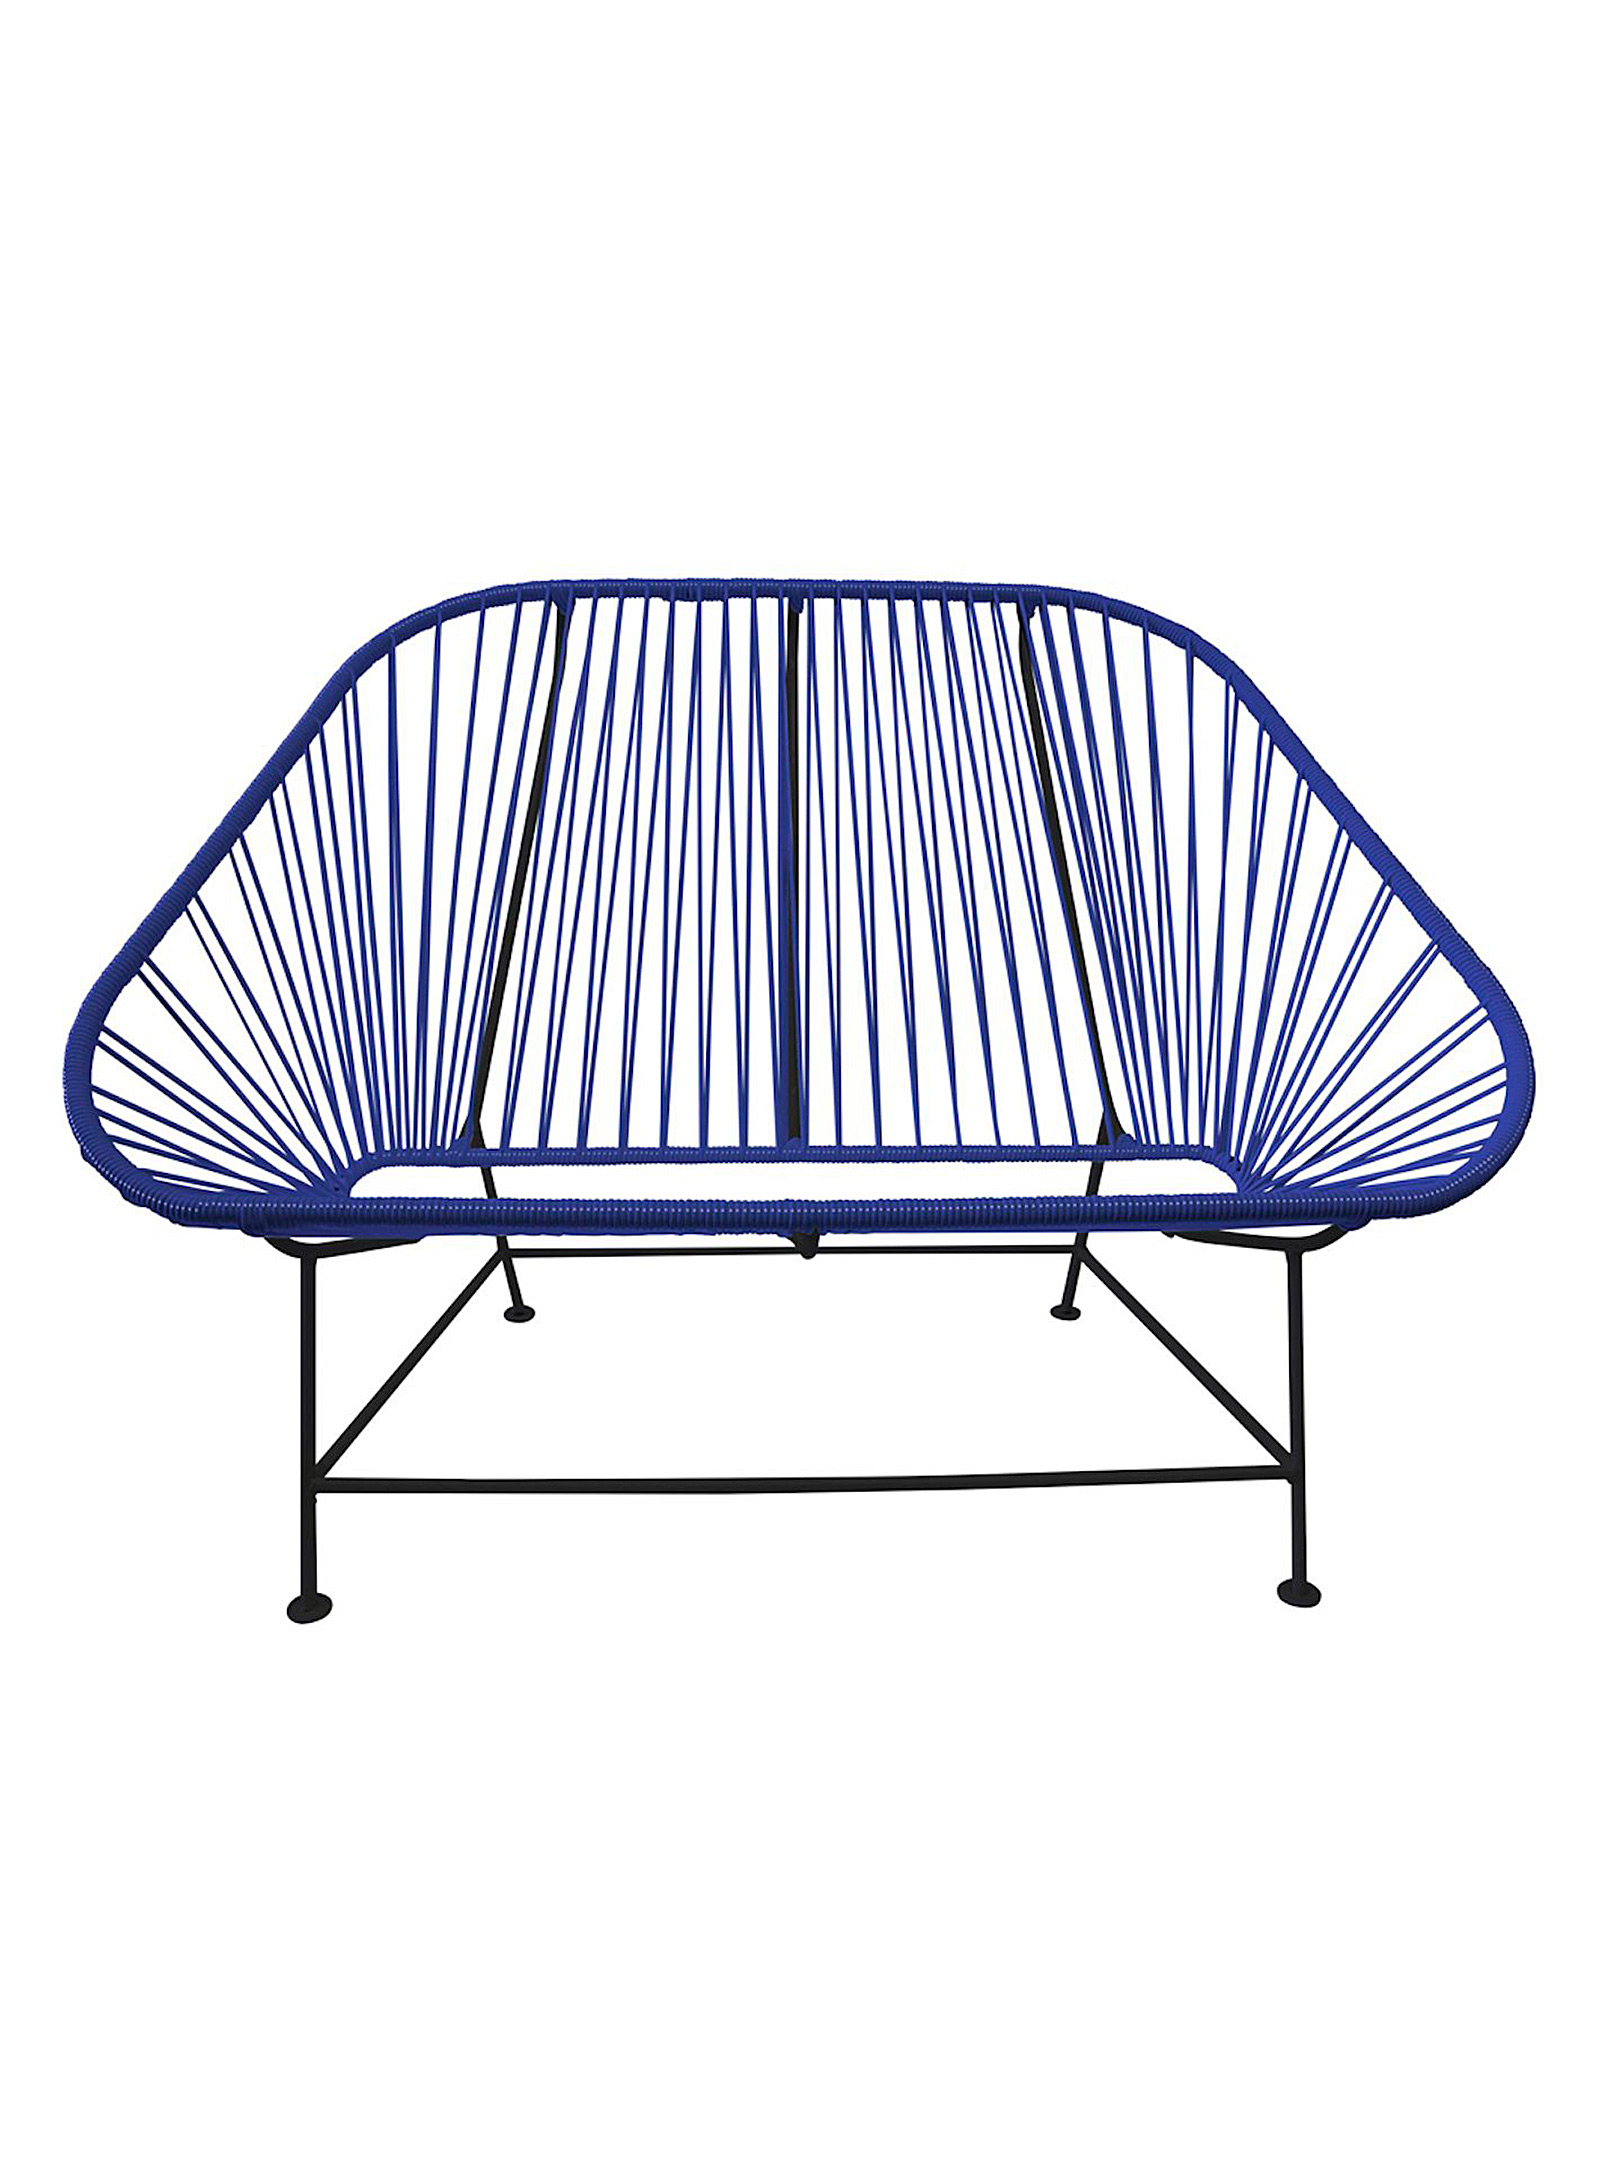 Simons Maison Inlove Outdoor Bench In Blue